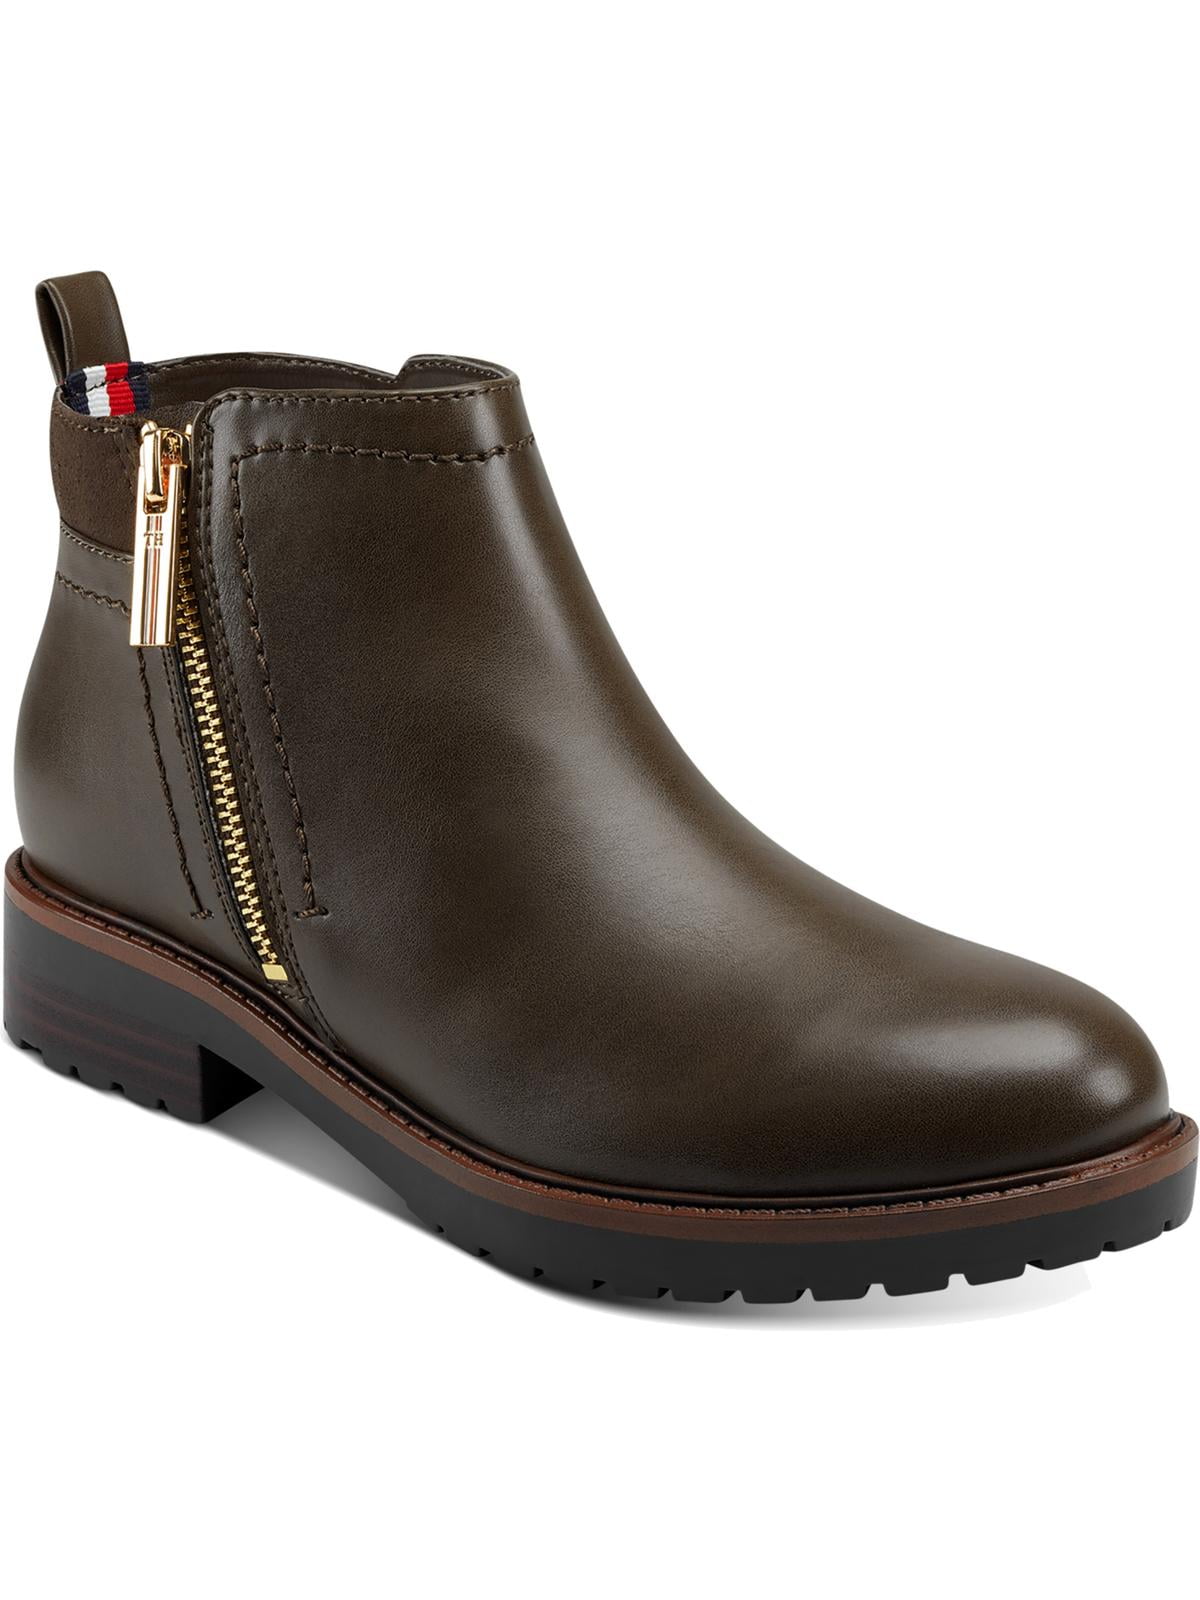 Buy > tommy hilfiger chelsea boots brown > in stock